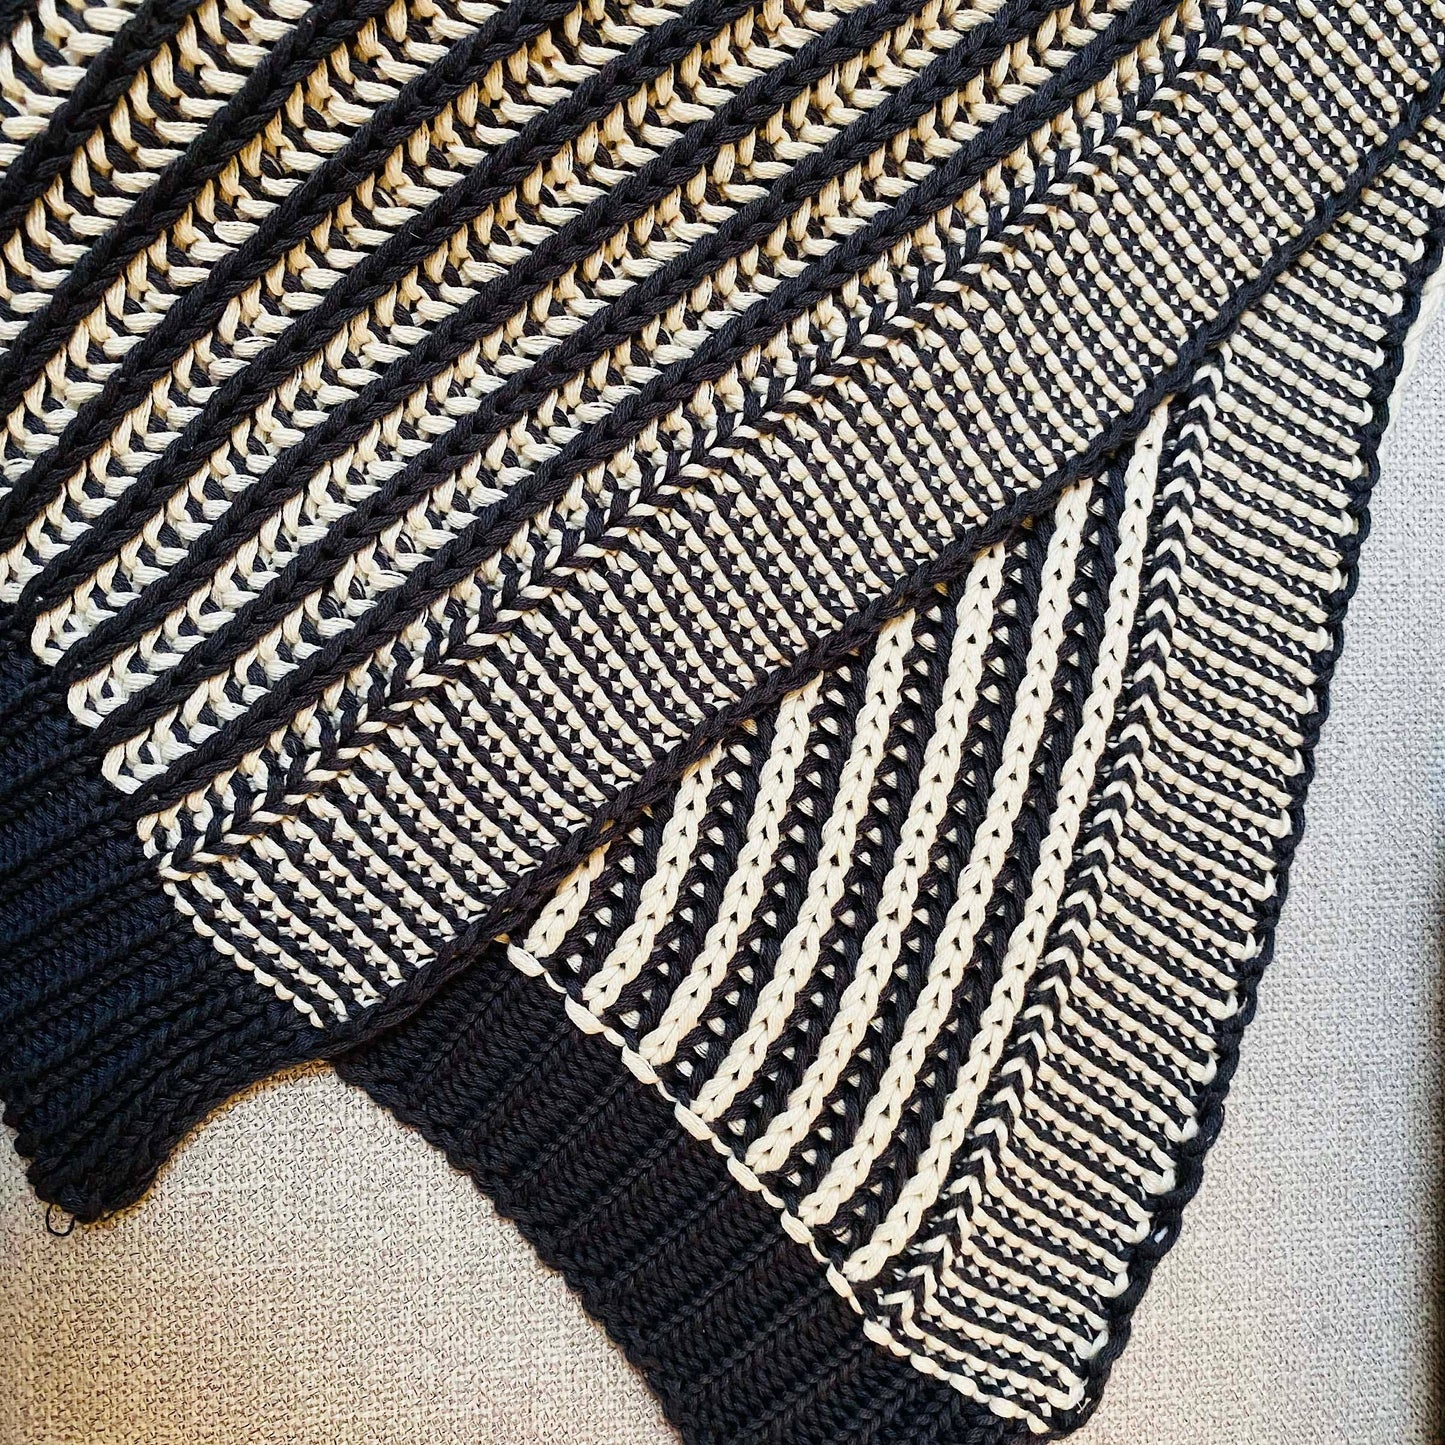 Knitted Throw Blanket-Natural/Charcoal